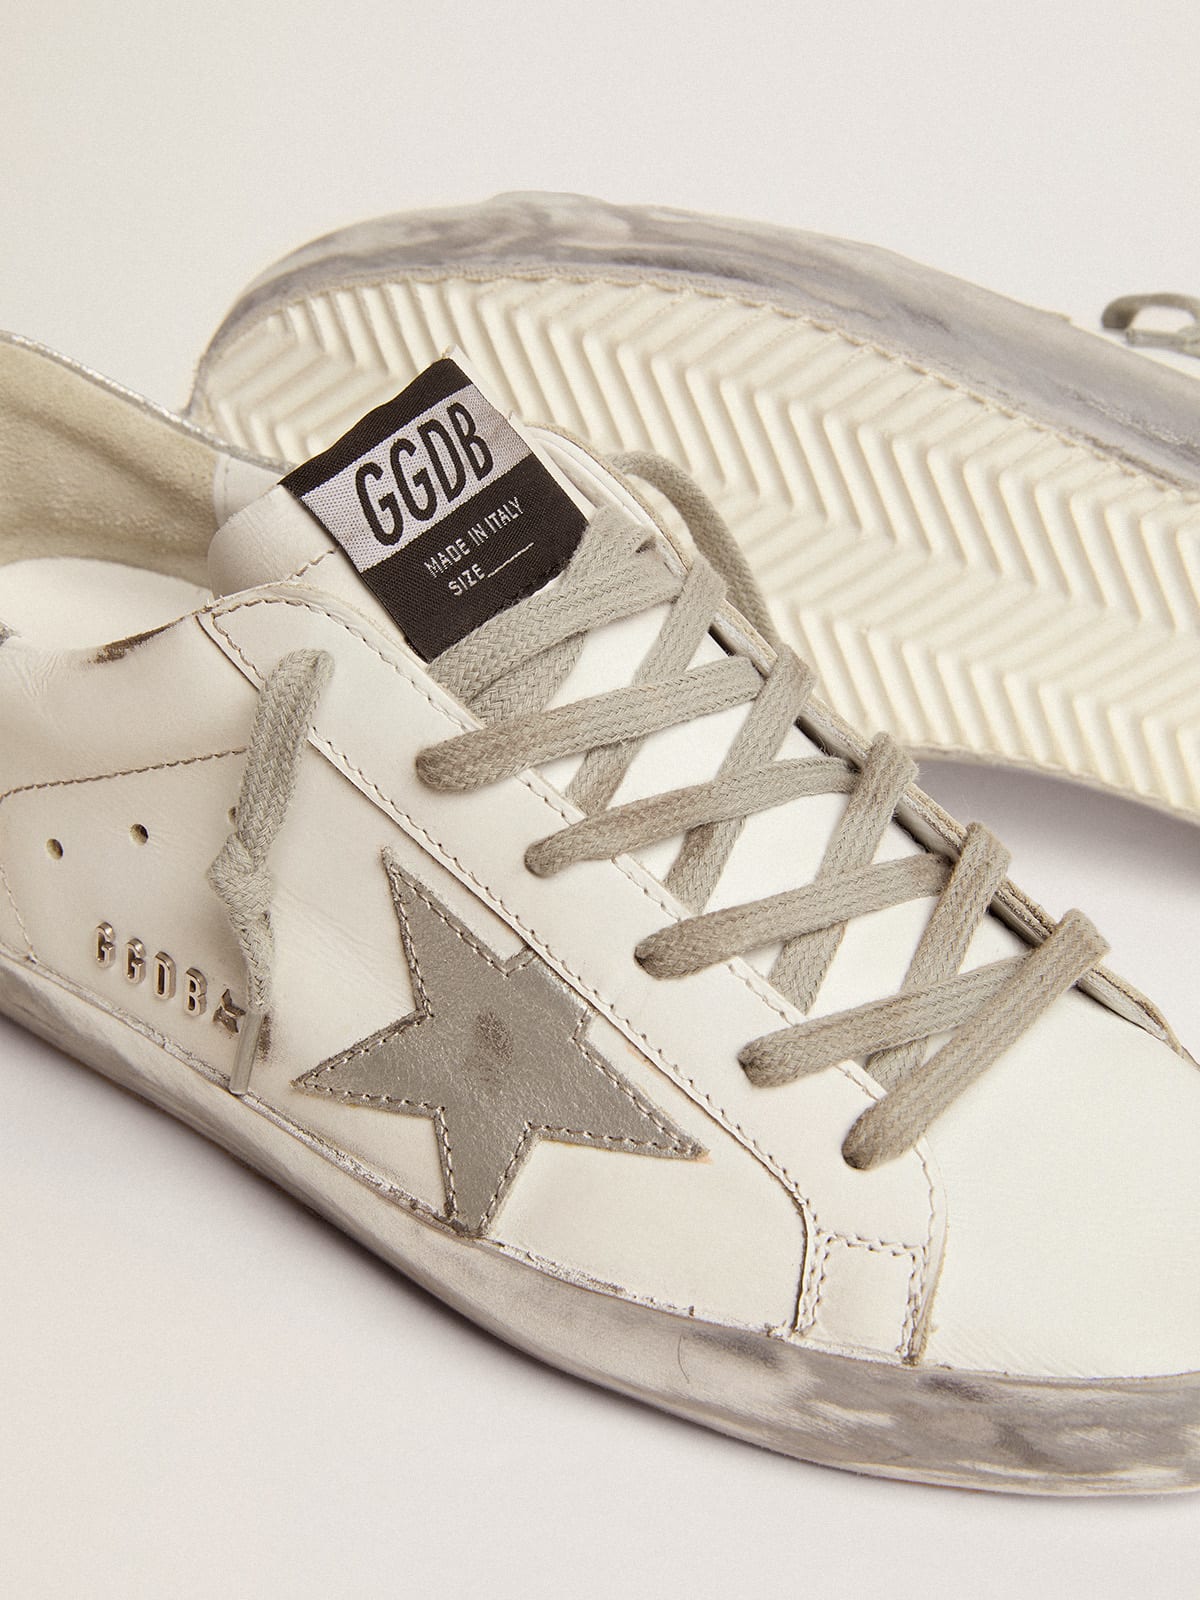 Golden Goose - Sneakers Super-Star mit Sparkle-Foxing in Silber und Metal Studs-Lettering in 